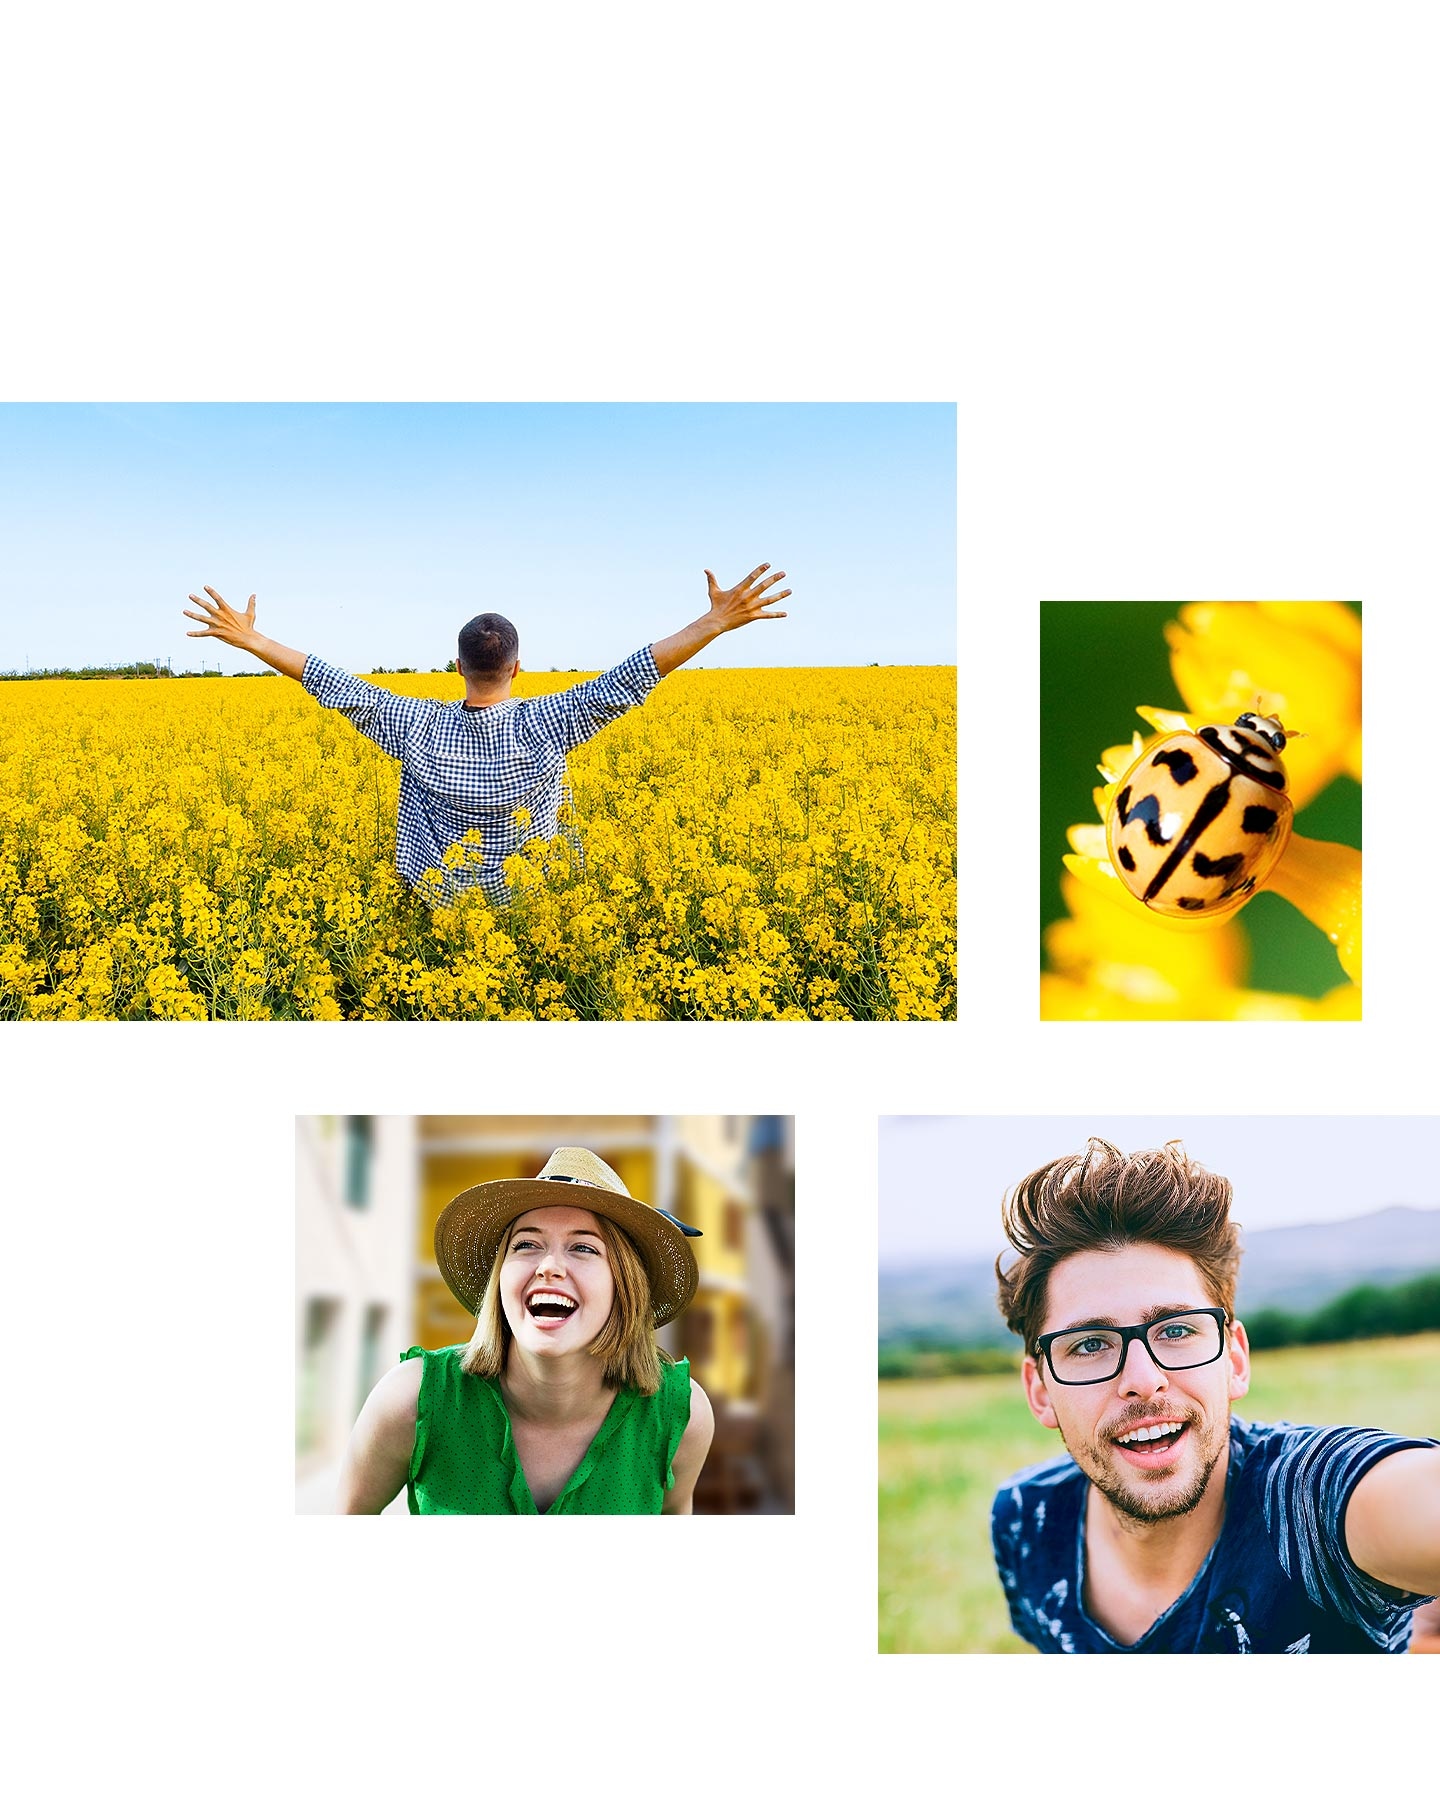 A photo taken with the Main camera shows a man showing his back and spreading his arms wide in the middle of a vast field of yellow flowers. Another photo taken with the Macro camera shows a detailed shot of a yellow ladybug. A photo taken with the Depth camera shows a portrait of a smiling woman. Lastly, a selfie of a man taken with the Front camera shows.